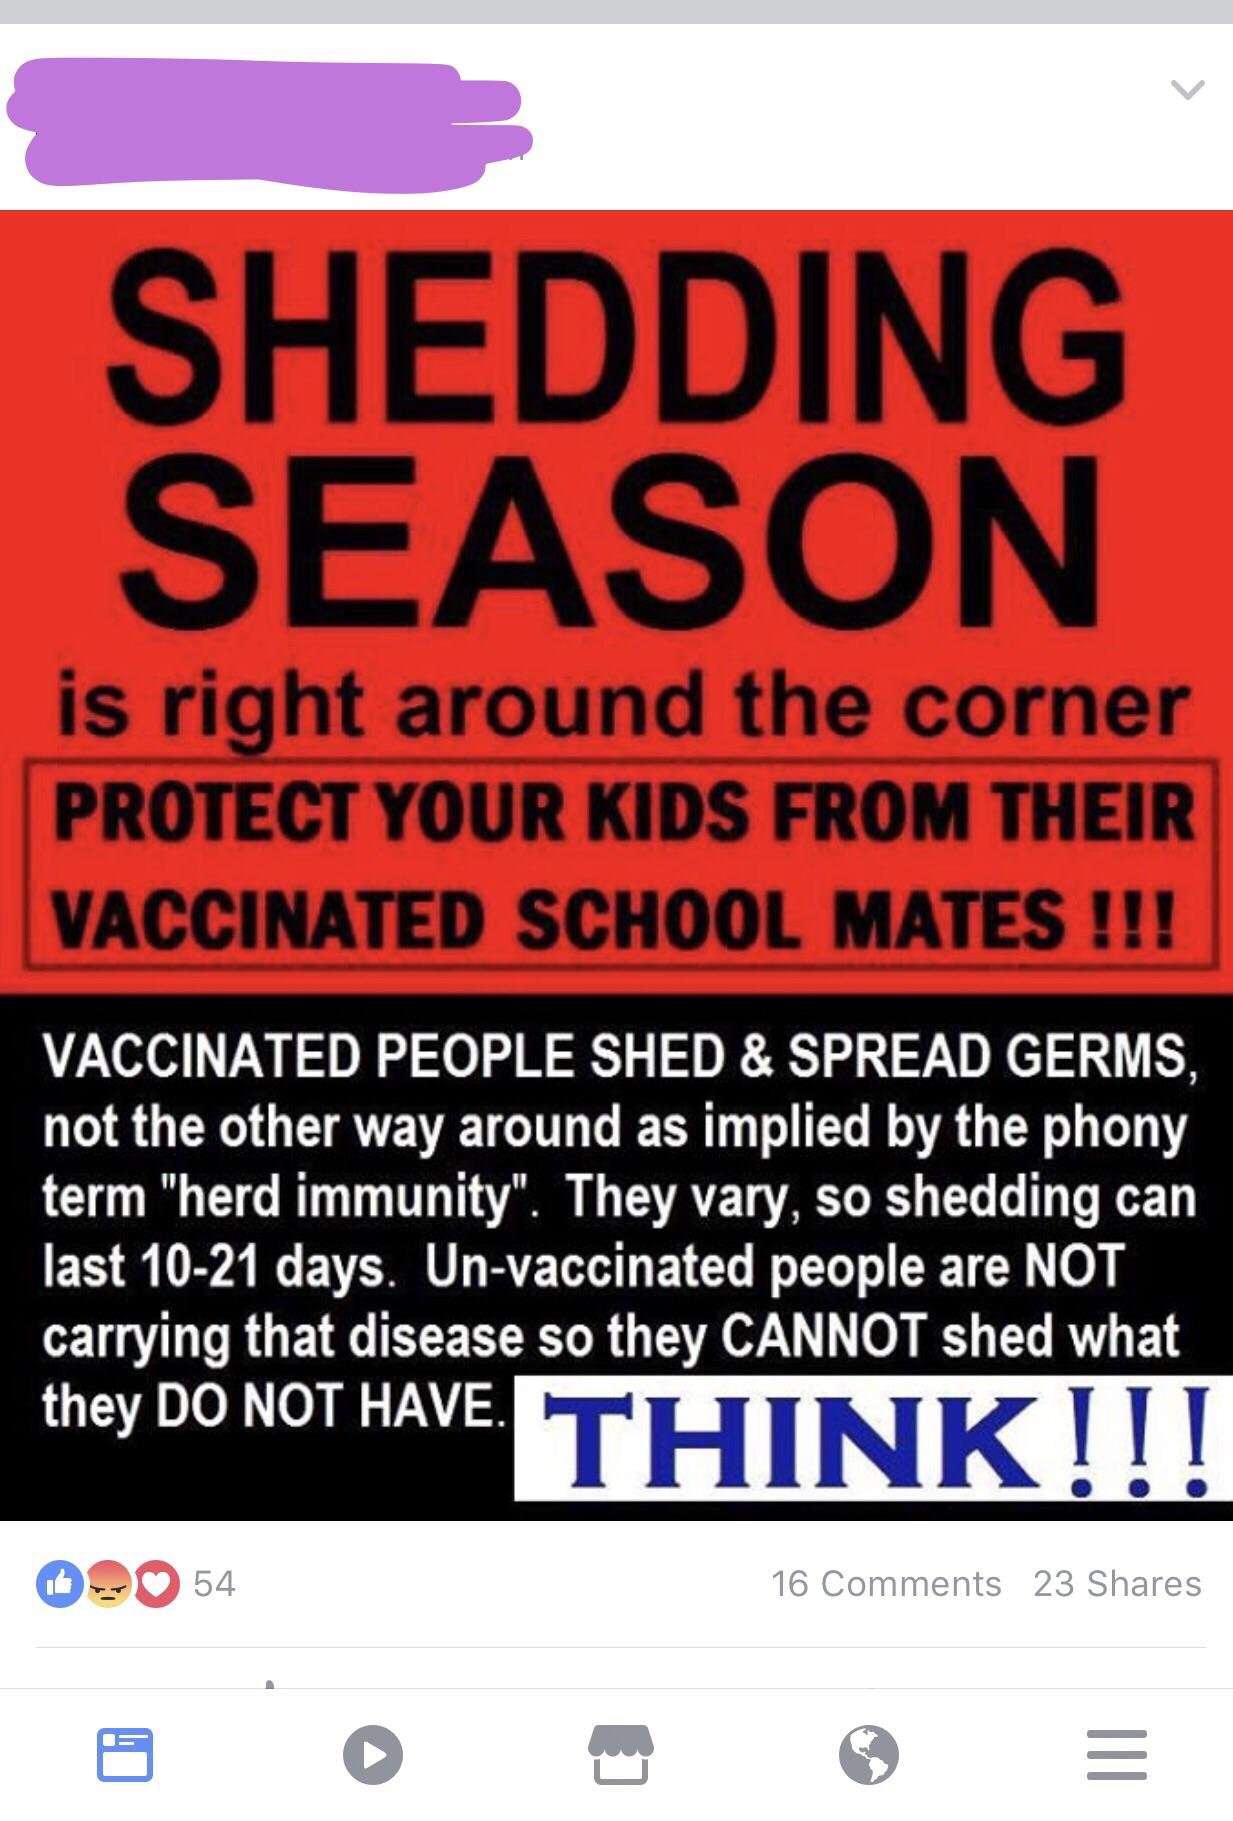 flu vaccine shedding meme - Shedding Season is right around the corner Protect Your Kids From Their Vaccinated School Mates !!! Vaccinated People Shed & Spread Germs, not the other way around as implied by the phony term "herd immunity". They vary, so she